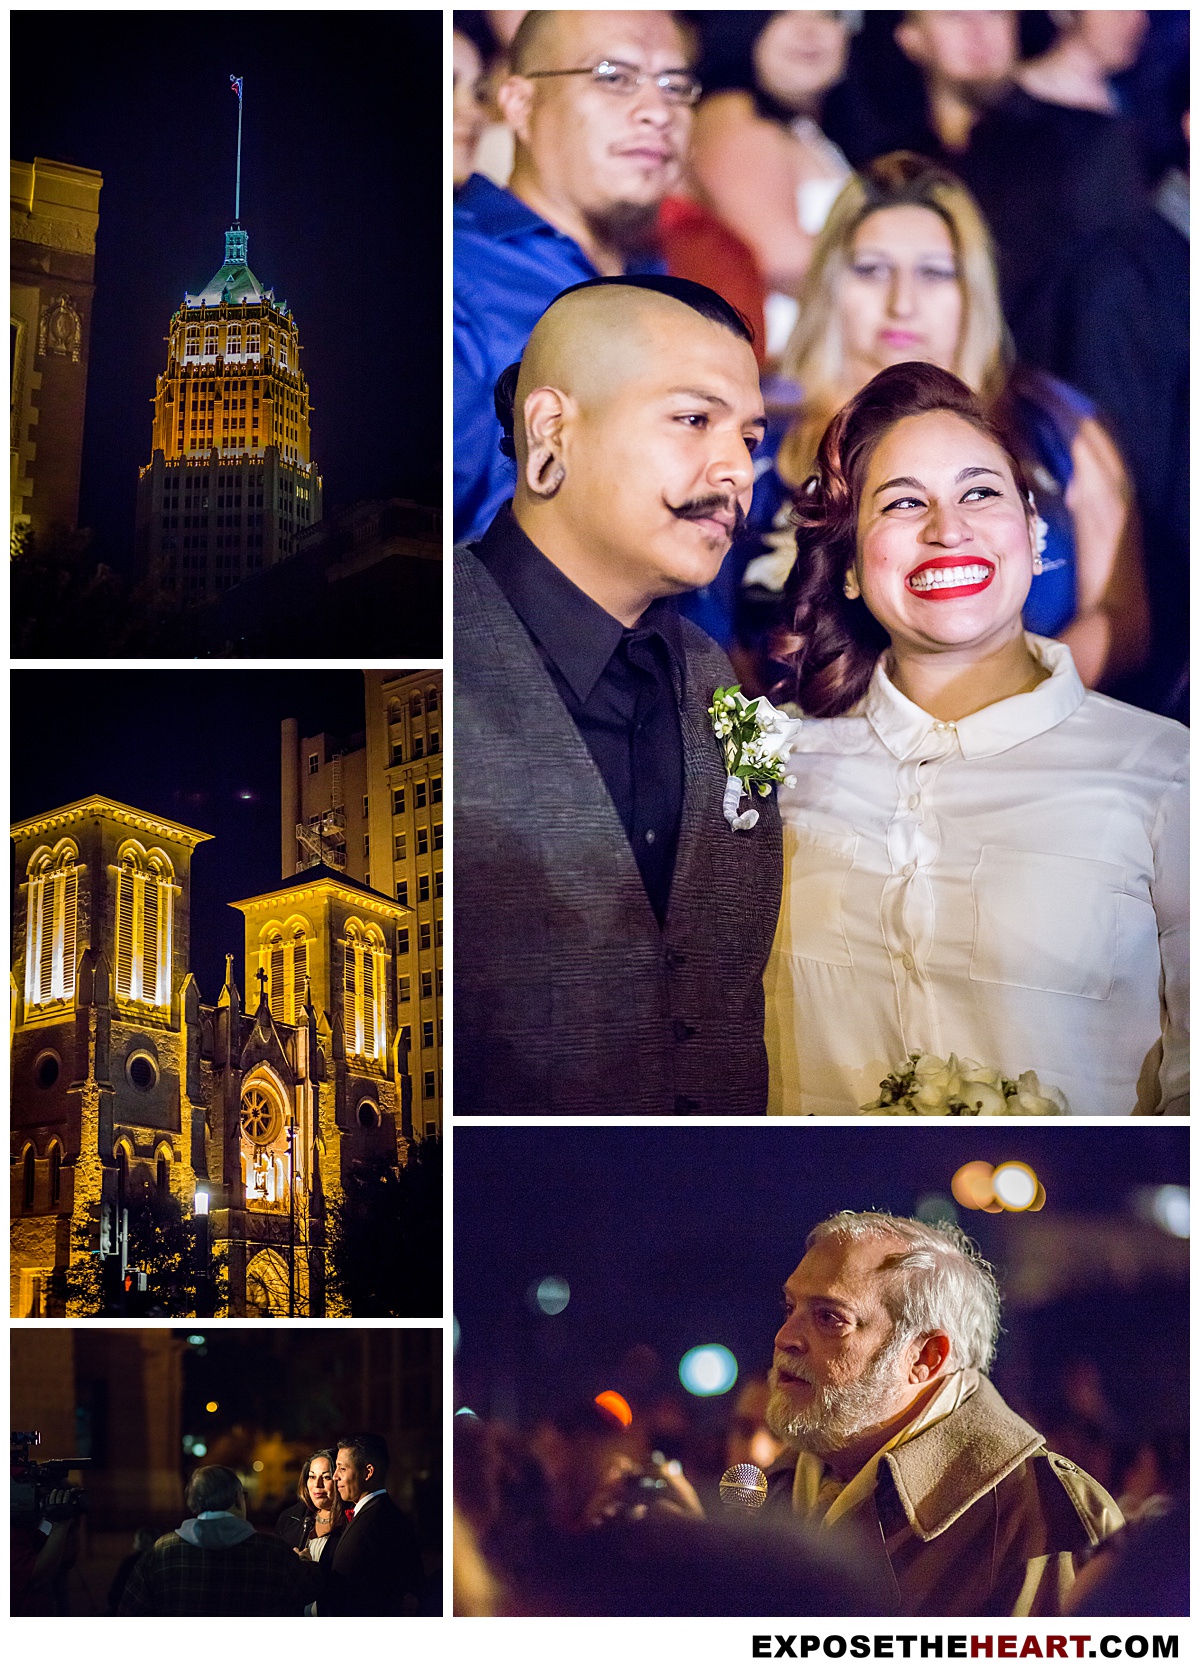 Valentine's Day weddings at the courthouse on the steps of the Bexar County Courthouse building